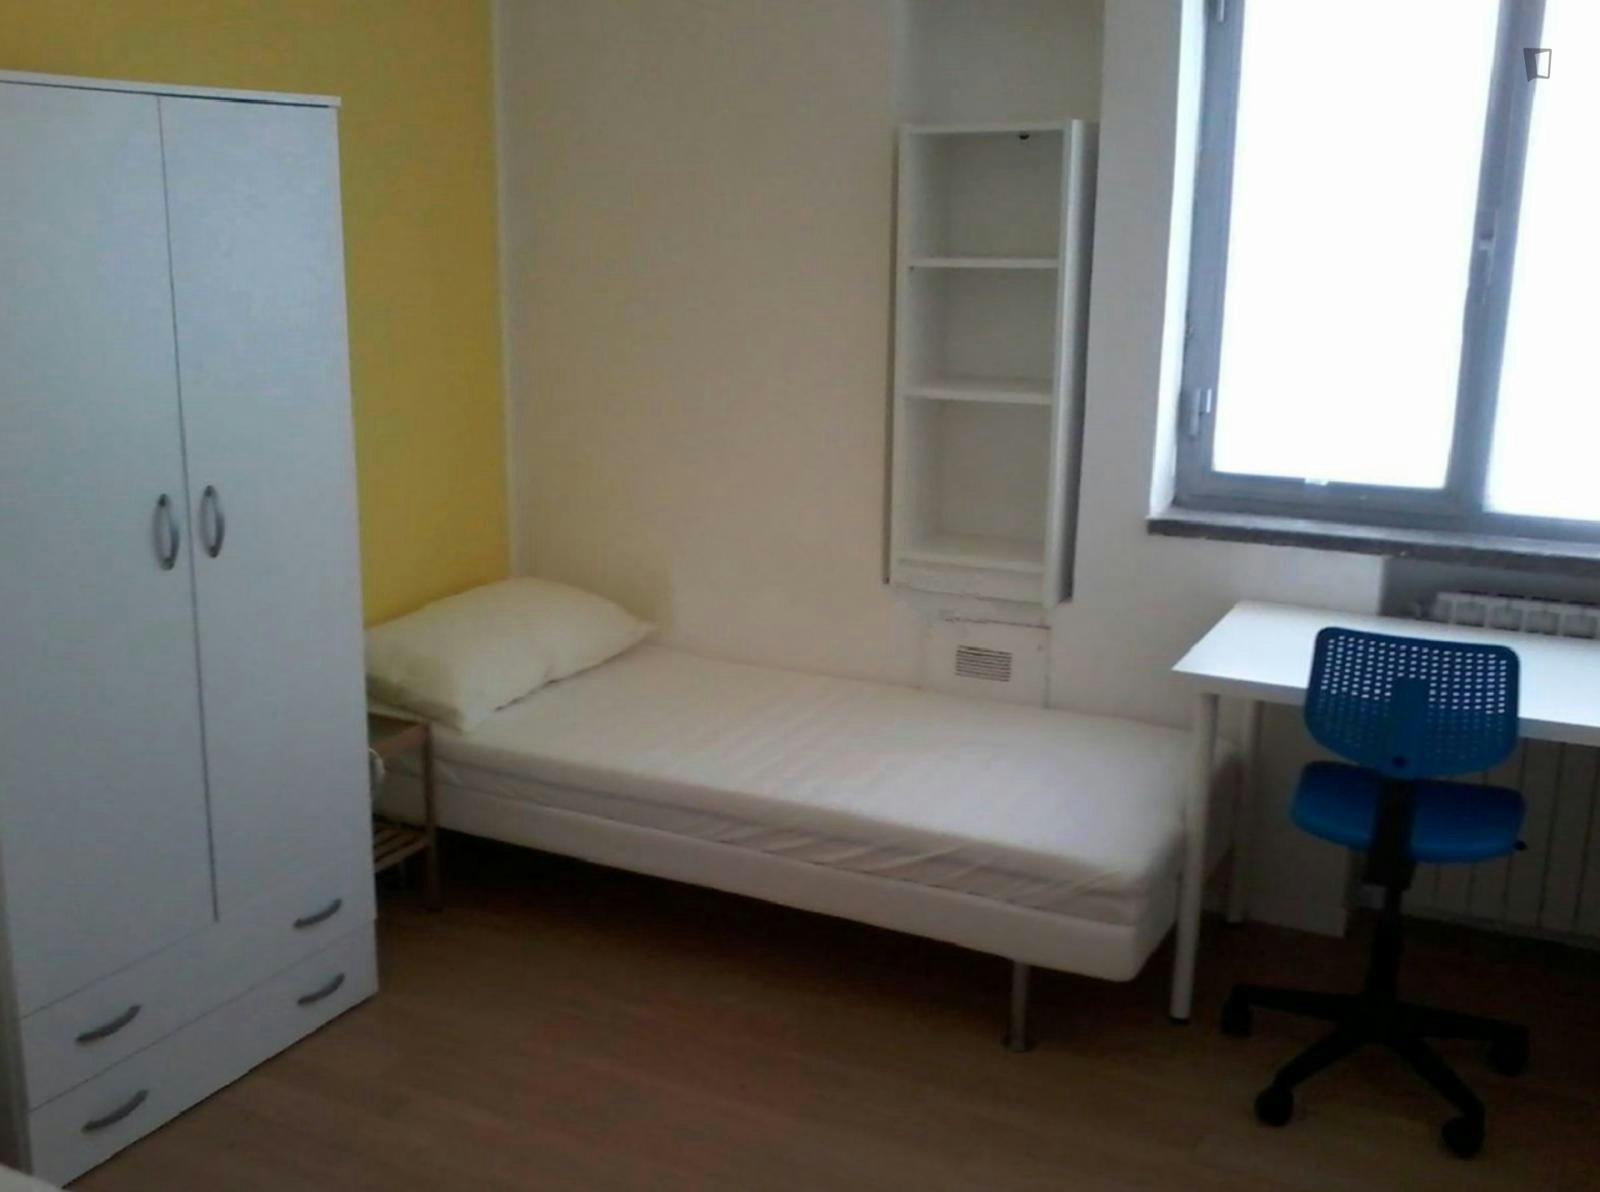 Nice single bedroom close to the University of Study of L'Aquila